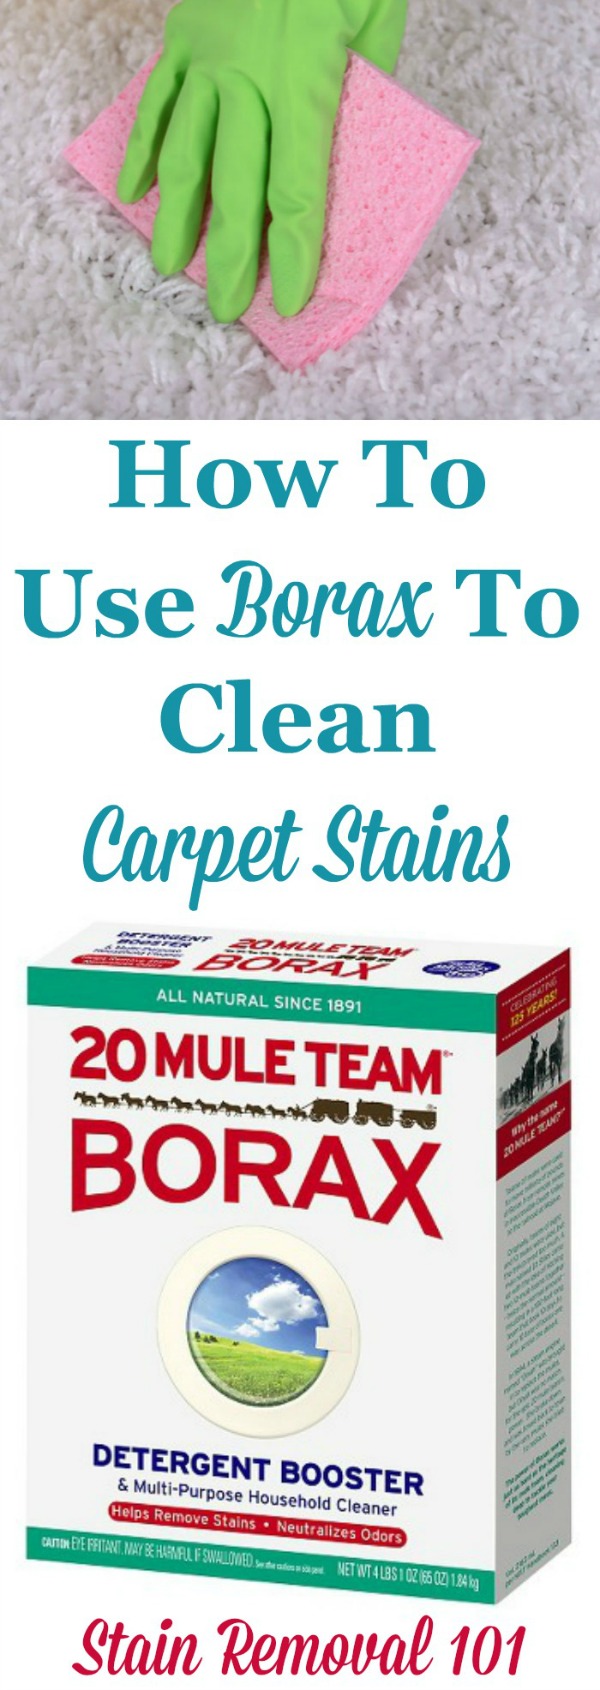 How to use borax to clean and remove stains from your carpet {on Stain Removal 101}